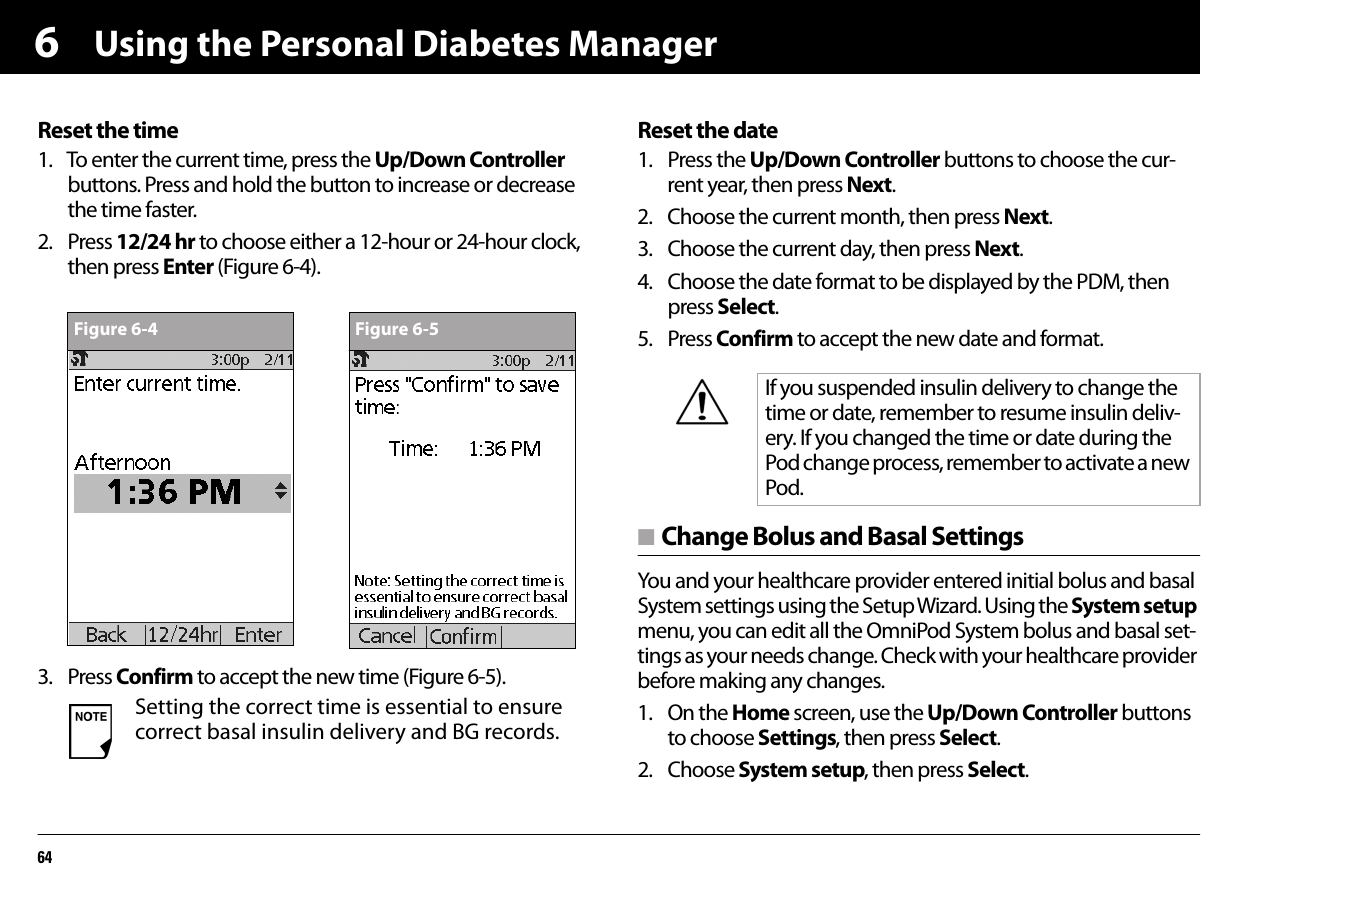 Using the Personal Diabetes Manager646Reset the time1. To enter the current time, press the Up/Down Controller buttons. Press and hold the button to increase or decrease the time faster.2. Press 12/24 hr to choose either a 12-hour or 24-hour clock, then press Enter (Figure 6-4).3. Press Confirm to accept the new time (Figure 6-5).Reset the date1. Press the Up/Down Controller buttons to choose the cur-rent year, then press Next.2. Choose the current month, then press Next.3. Choose the current day, then press Next.4. Choose the date format to be displayed by the PDM, then press Select.5. Press Confirm to accept the new date and format.n Change Bolus and Basal SettingsYou and your healthcare provider entered initial bolus and basal System settings using the Setup Wizard. Using the System setup menu, you can edit all the OmniPod System bolus and basal set-tings as your needs change. Check with your healthcare provider before making any changes.1. On the Home screen, use the Up/Down Controller buttons to choose Settings, then press Select.2. Choose System setup, then press Select.Setting the correct time is essential to ensure correct basal insulin delivery and BG records. Figure 6-4 Figure 6-5If you suspended insulin delivery to change the time or date, remember to resume insulin deliv-ery. If you changed the time or date during the Pod change process, remember to activate a new Pod.